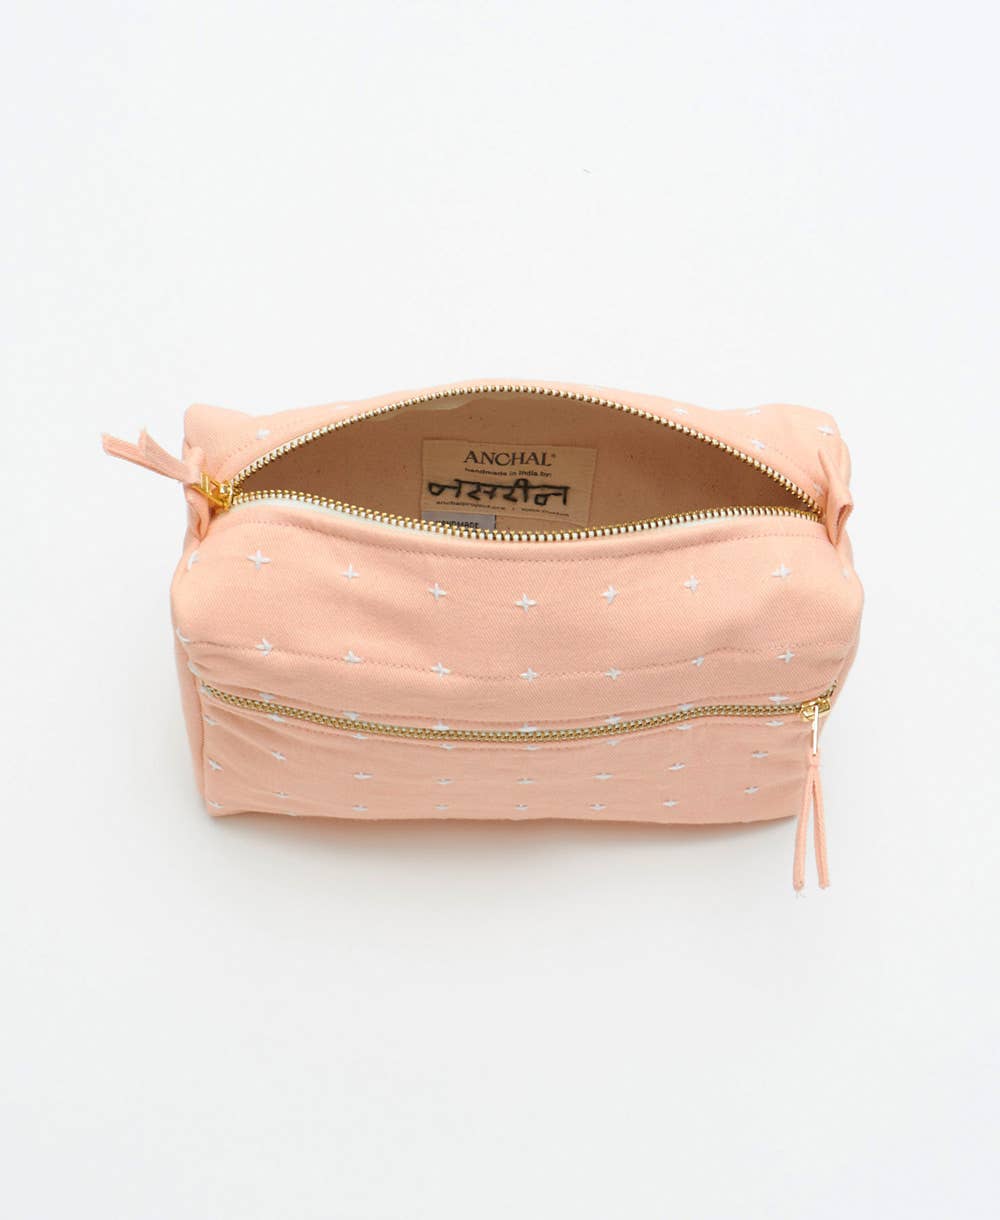 Anchal Cross-Stitch Toiletry Bag | Pink